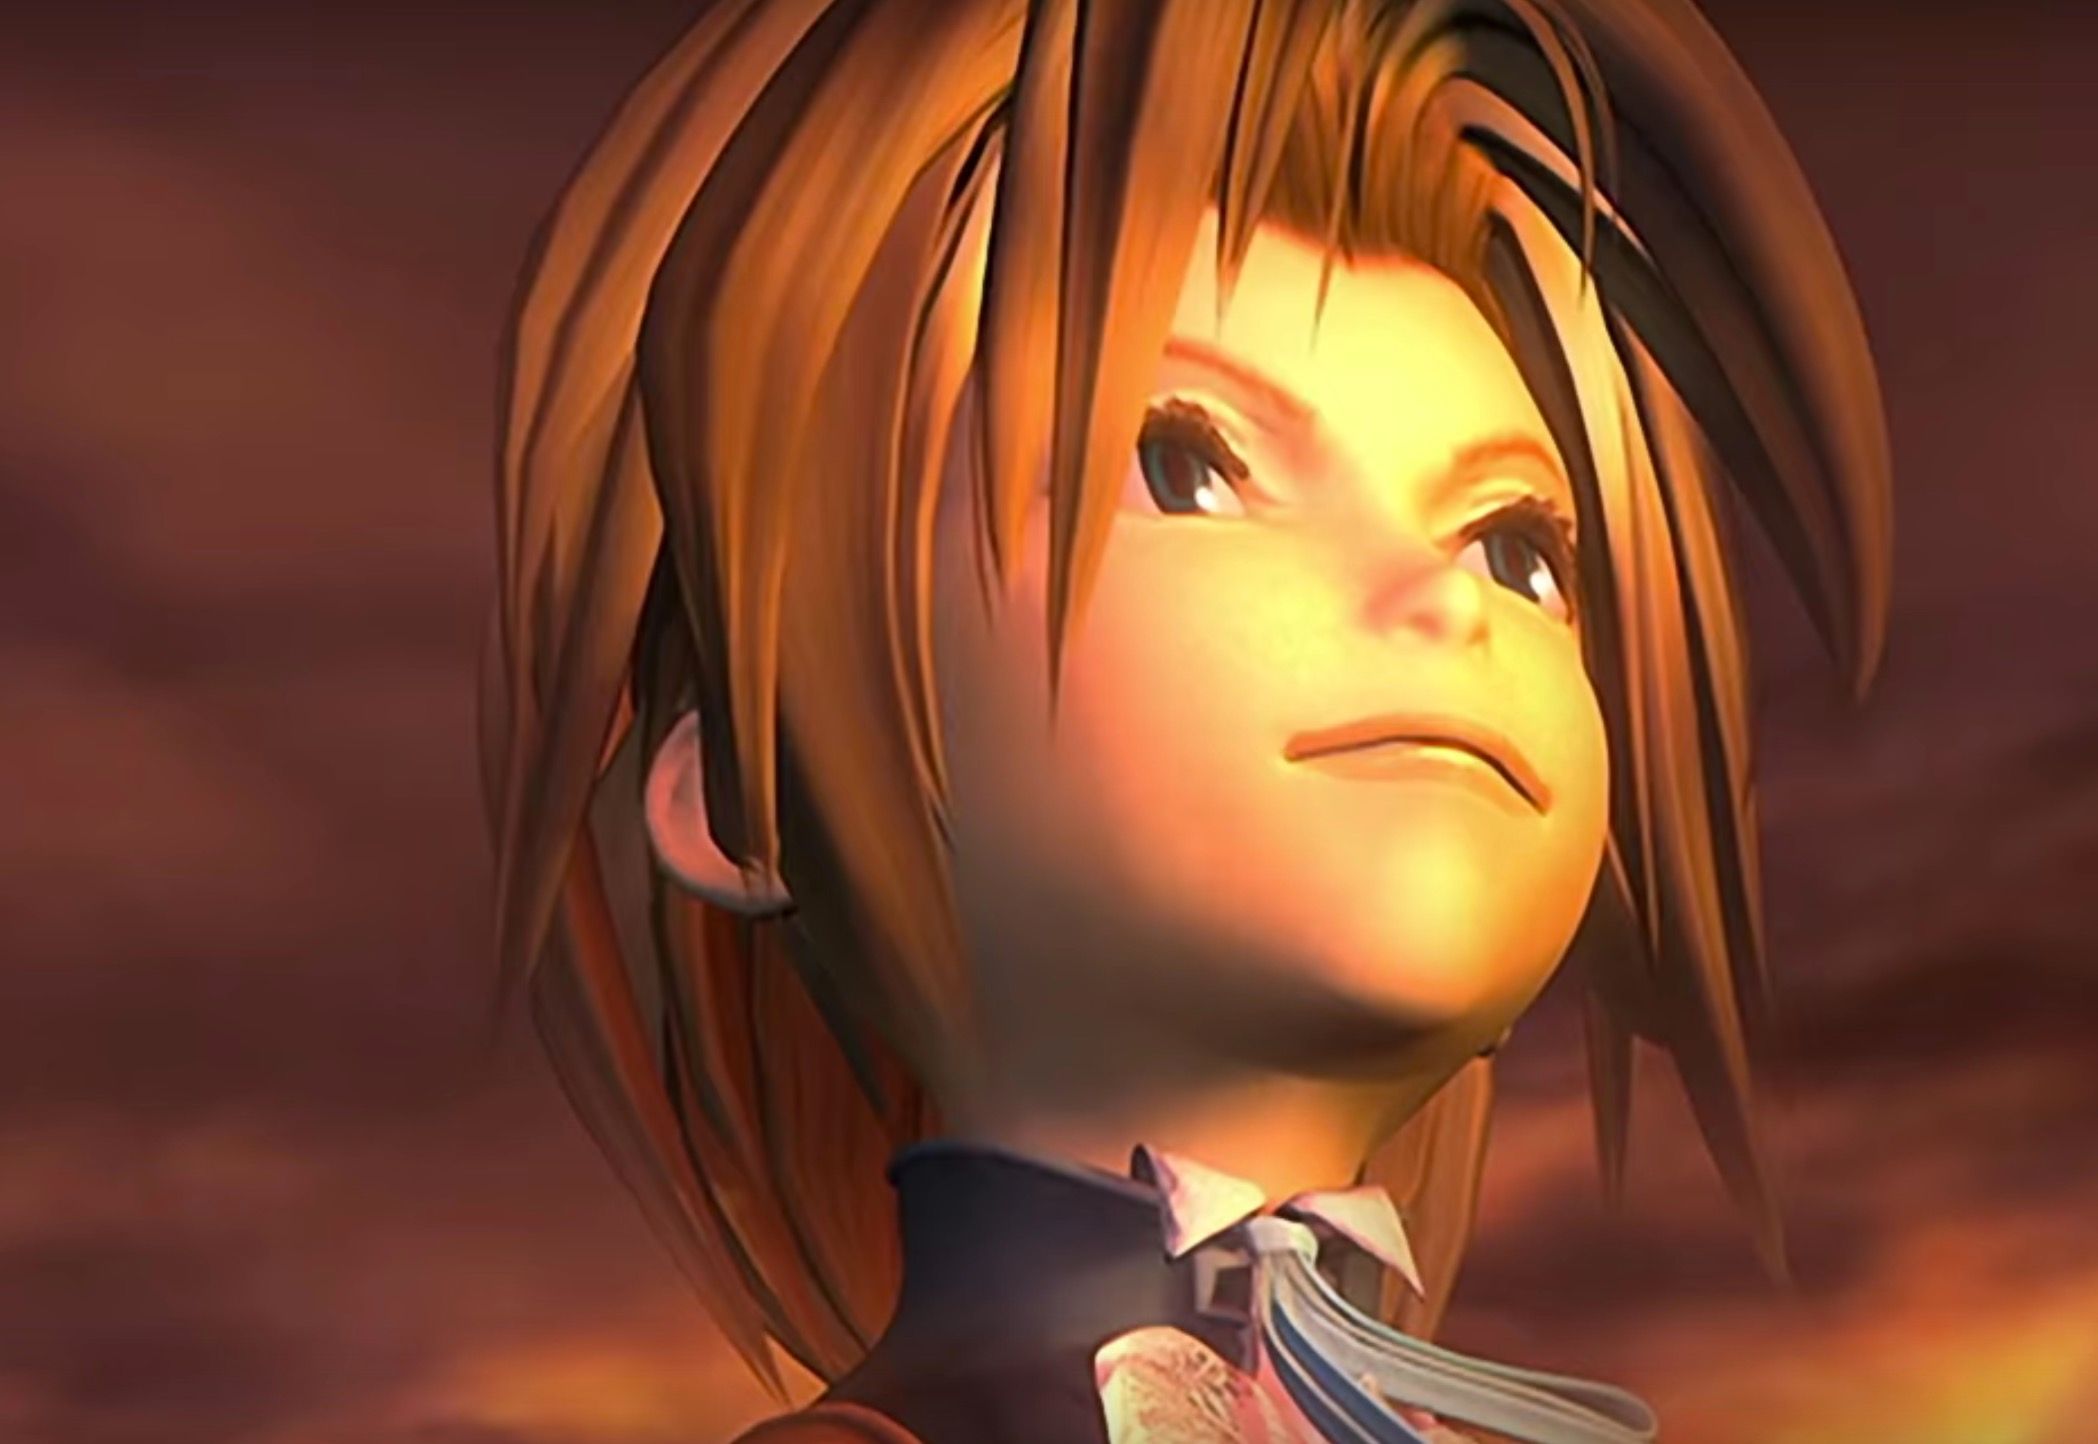 square s final fantasy ix is coming to pc ios and android in 2016 image 1